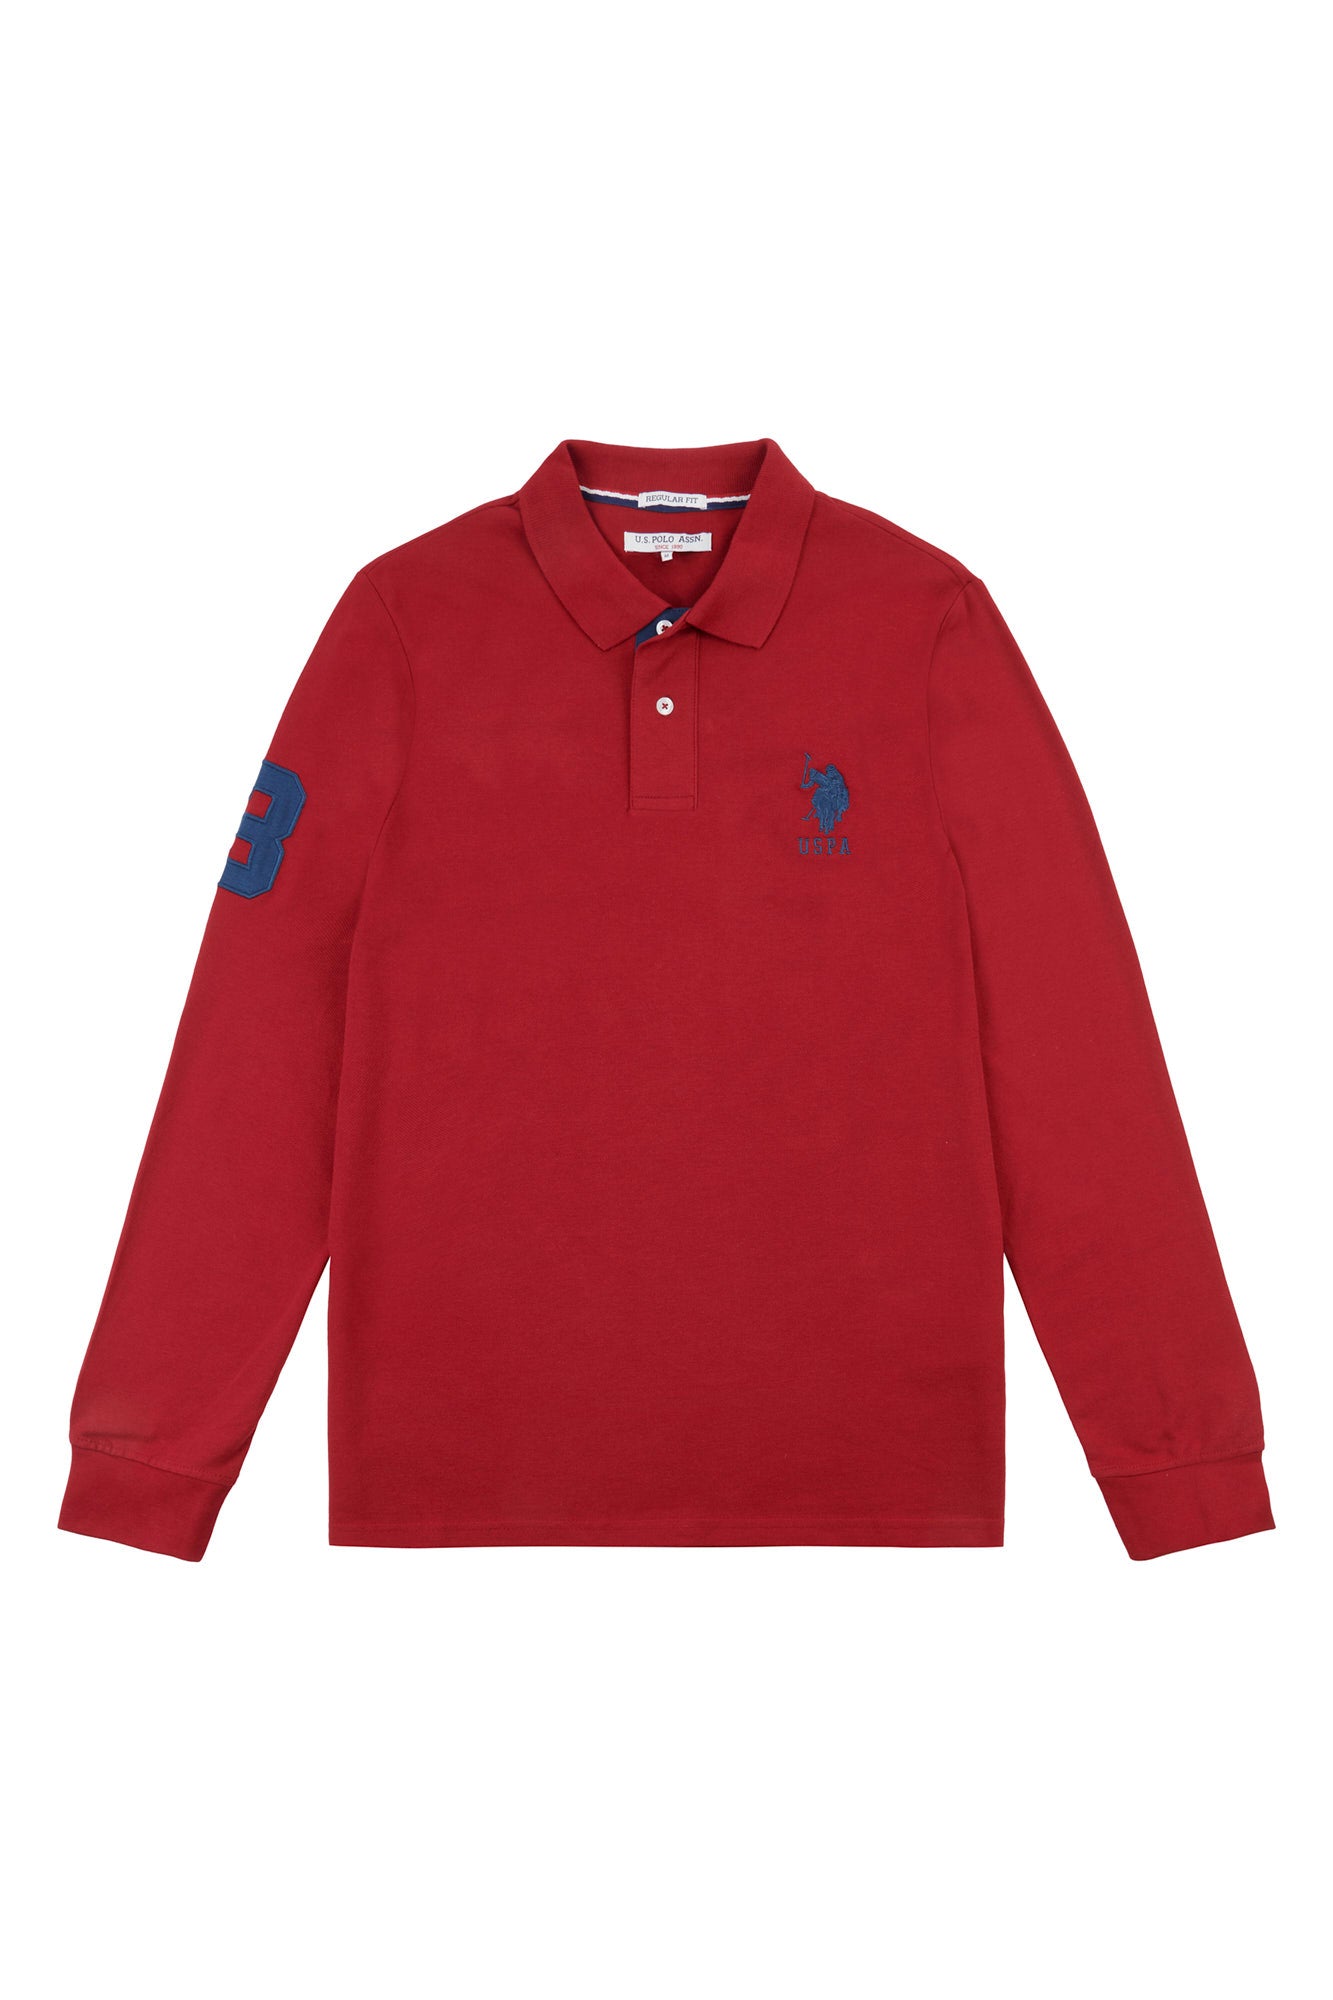 Mens Player 3 Long Sleeve Polo Shirt in Biking Red